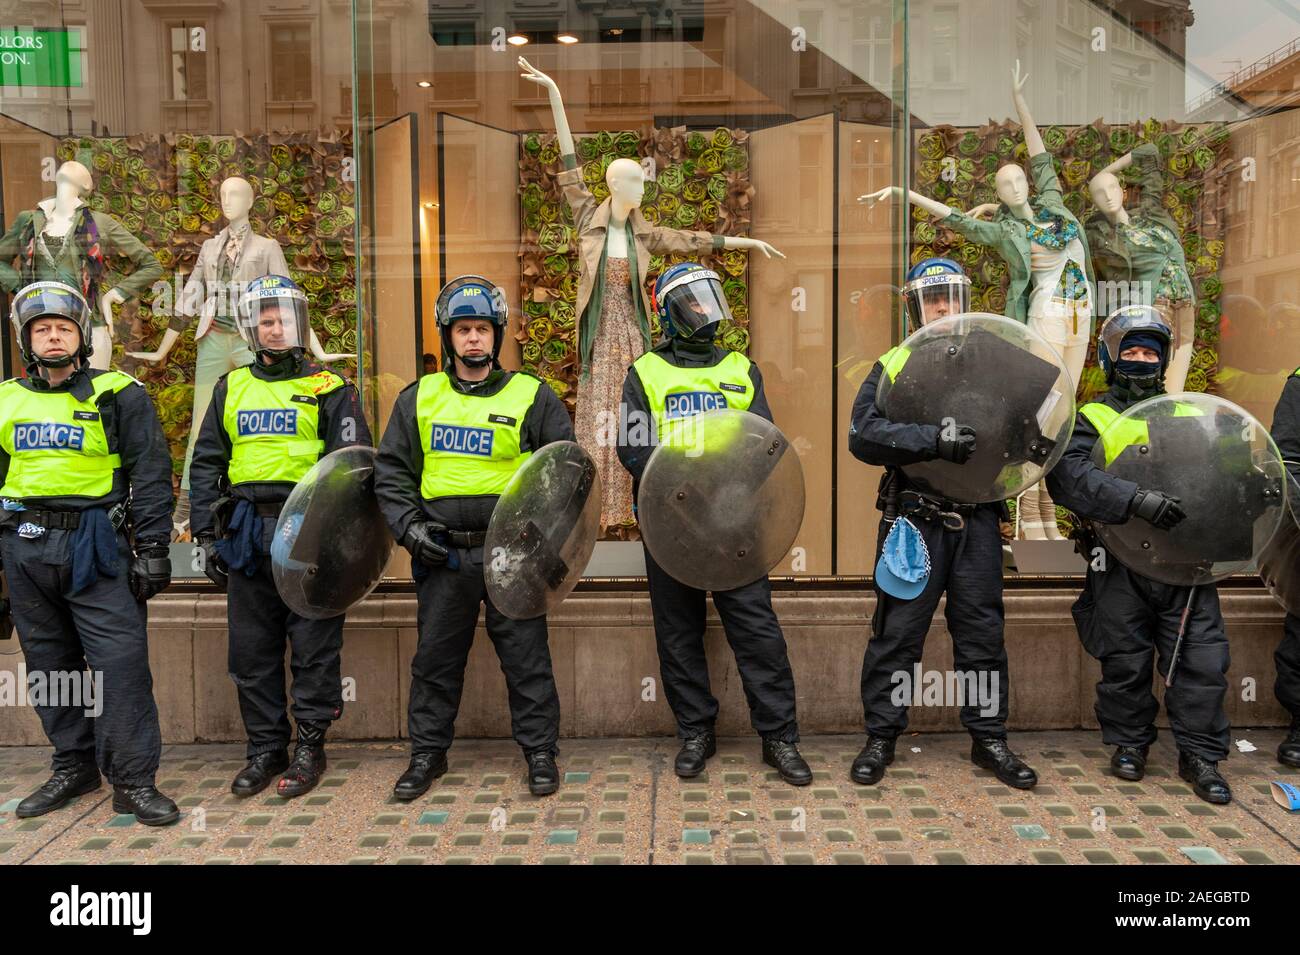 Line of riot police protecting central London shopfront during demonstration, UK Stock Photo